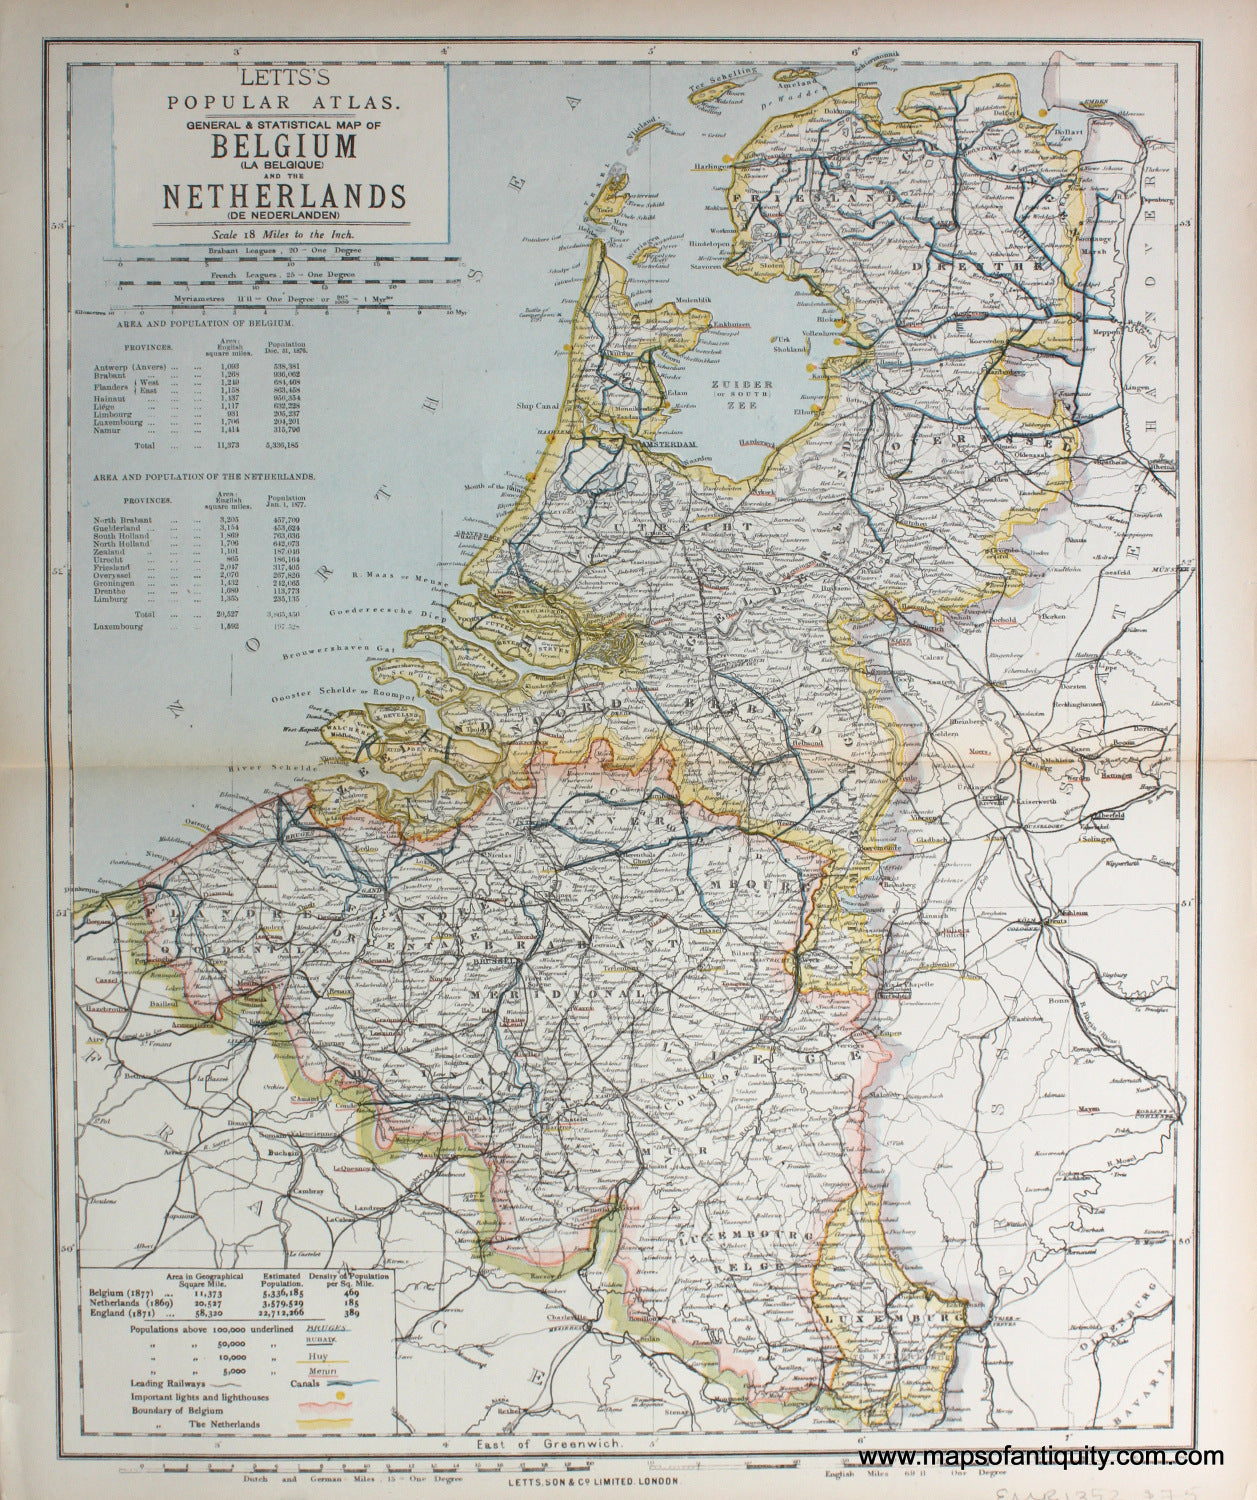 printed-color-Antique-Map-General-and-Statistical-Map-of-Belgium-and-the-Netherlands-Europe-Europe-General-1883-Letts-Maps-Of-Antiquity